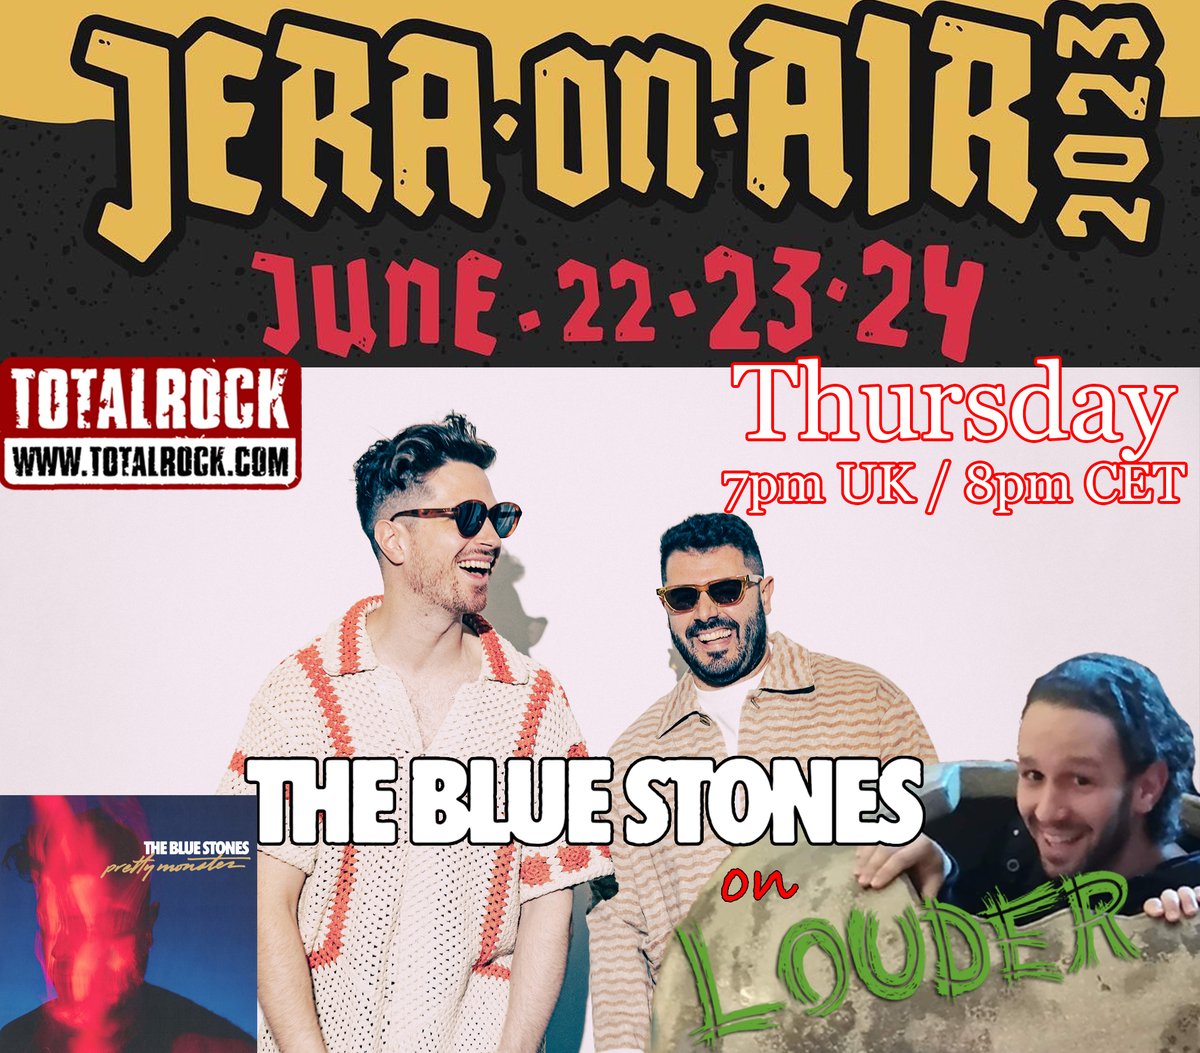 7pmUK on @TotalRockOnline I chat w @TheBlueStones + Thijs of @JERAONAIR +spin @birdeatsbaby @burningwitches_ @cindylouiseoffl @CurrentsCT @deathstars @ignea_band @infearofficial @Lansdownemusic @mazuniverze @OFVIRTUE @statuesband @TDWPband @ToKillAchilles @Weathersband +more